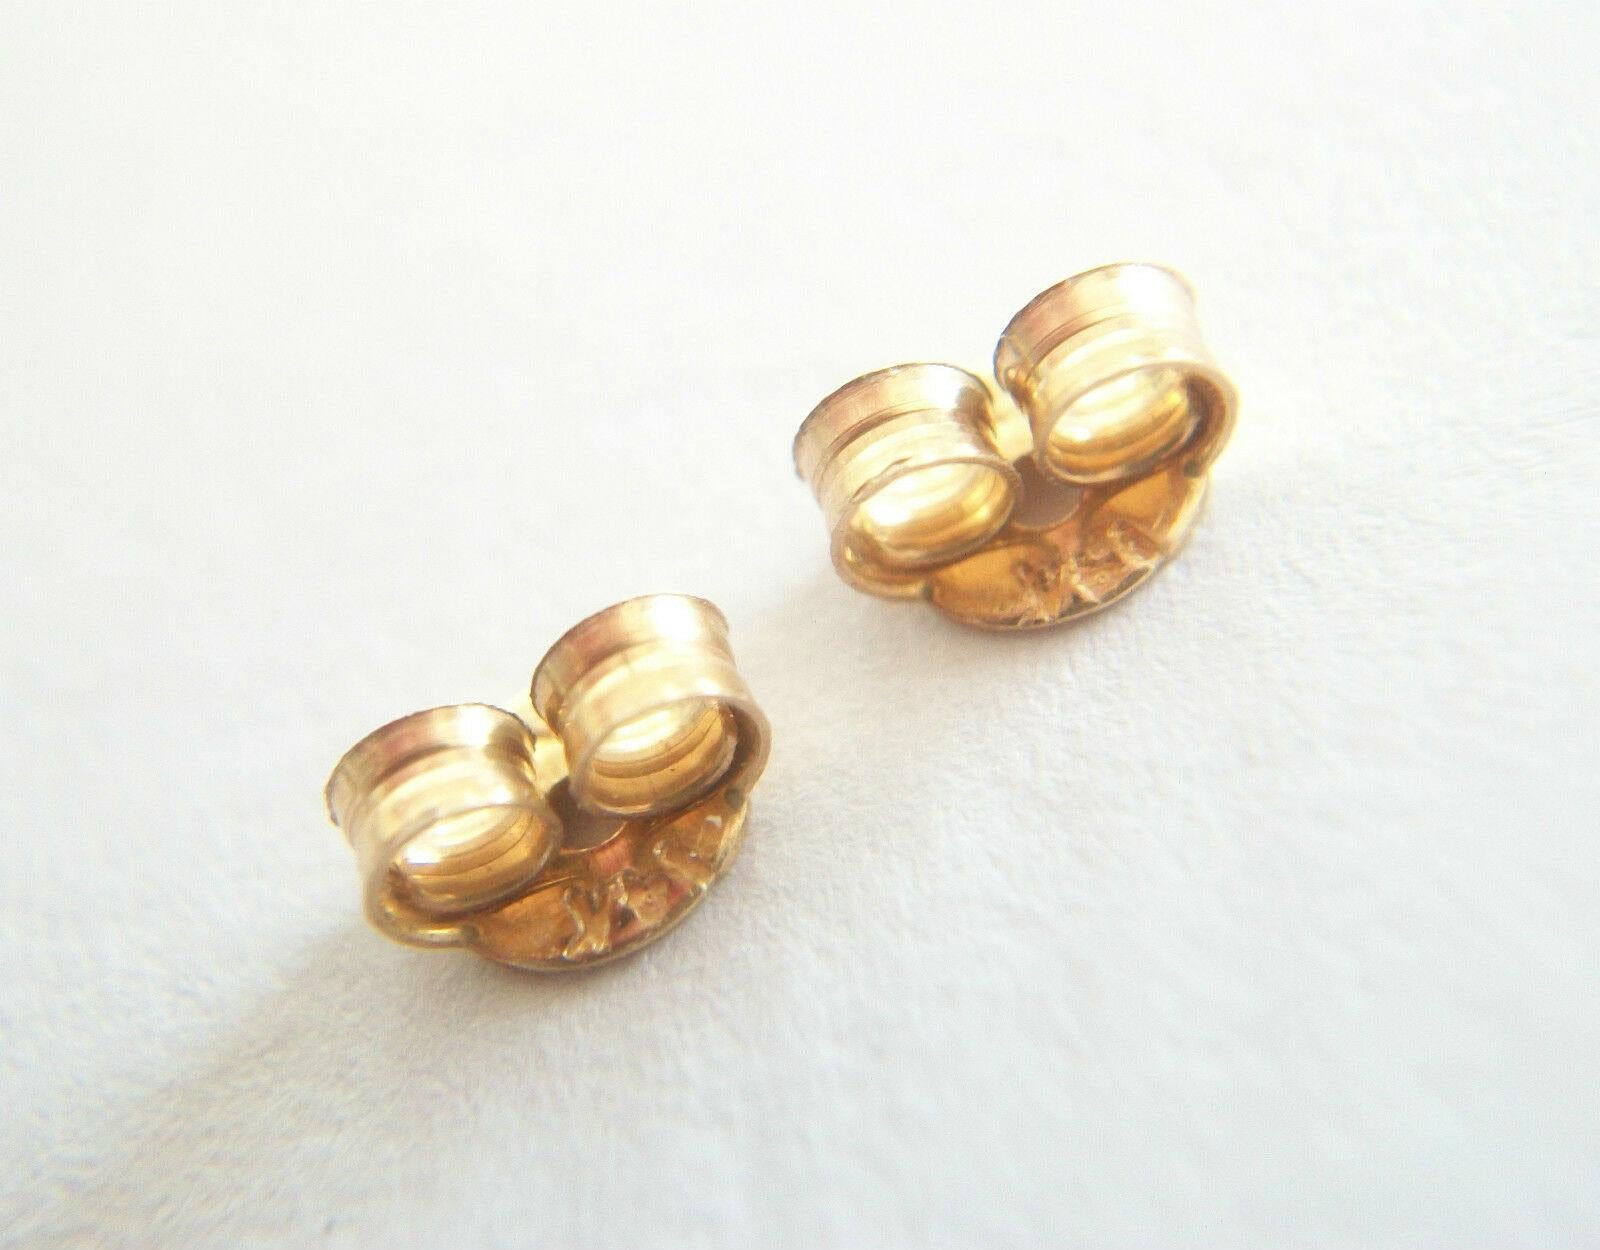 Vintage 14k Yellow Gold 'C' Scroll Earrings, Signed, U.S, Late 20th Century For Sale 6